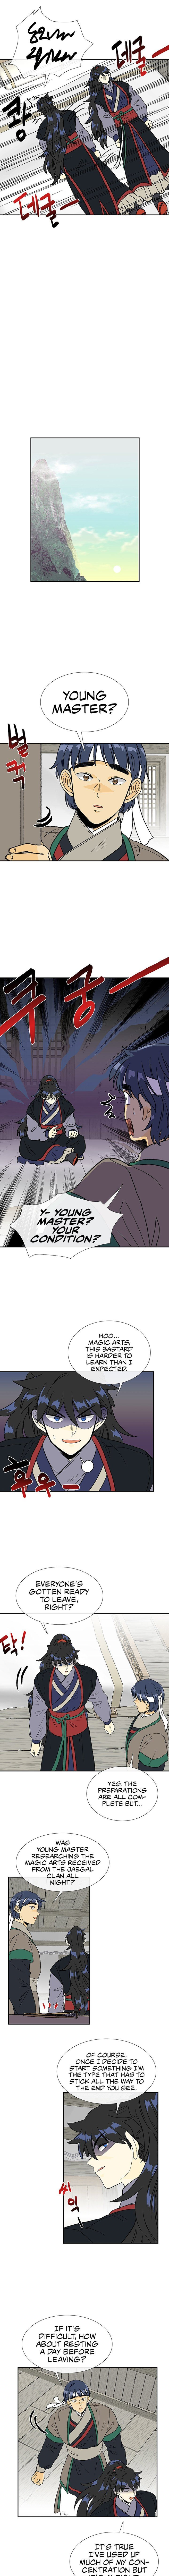 The Scholars Reincarnation Chapter 143 Page 6